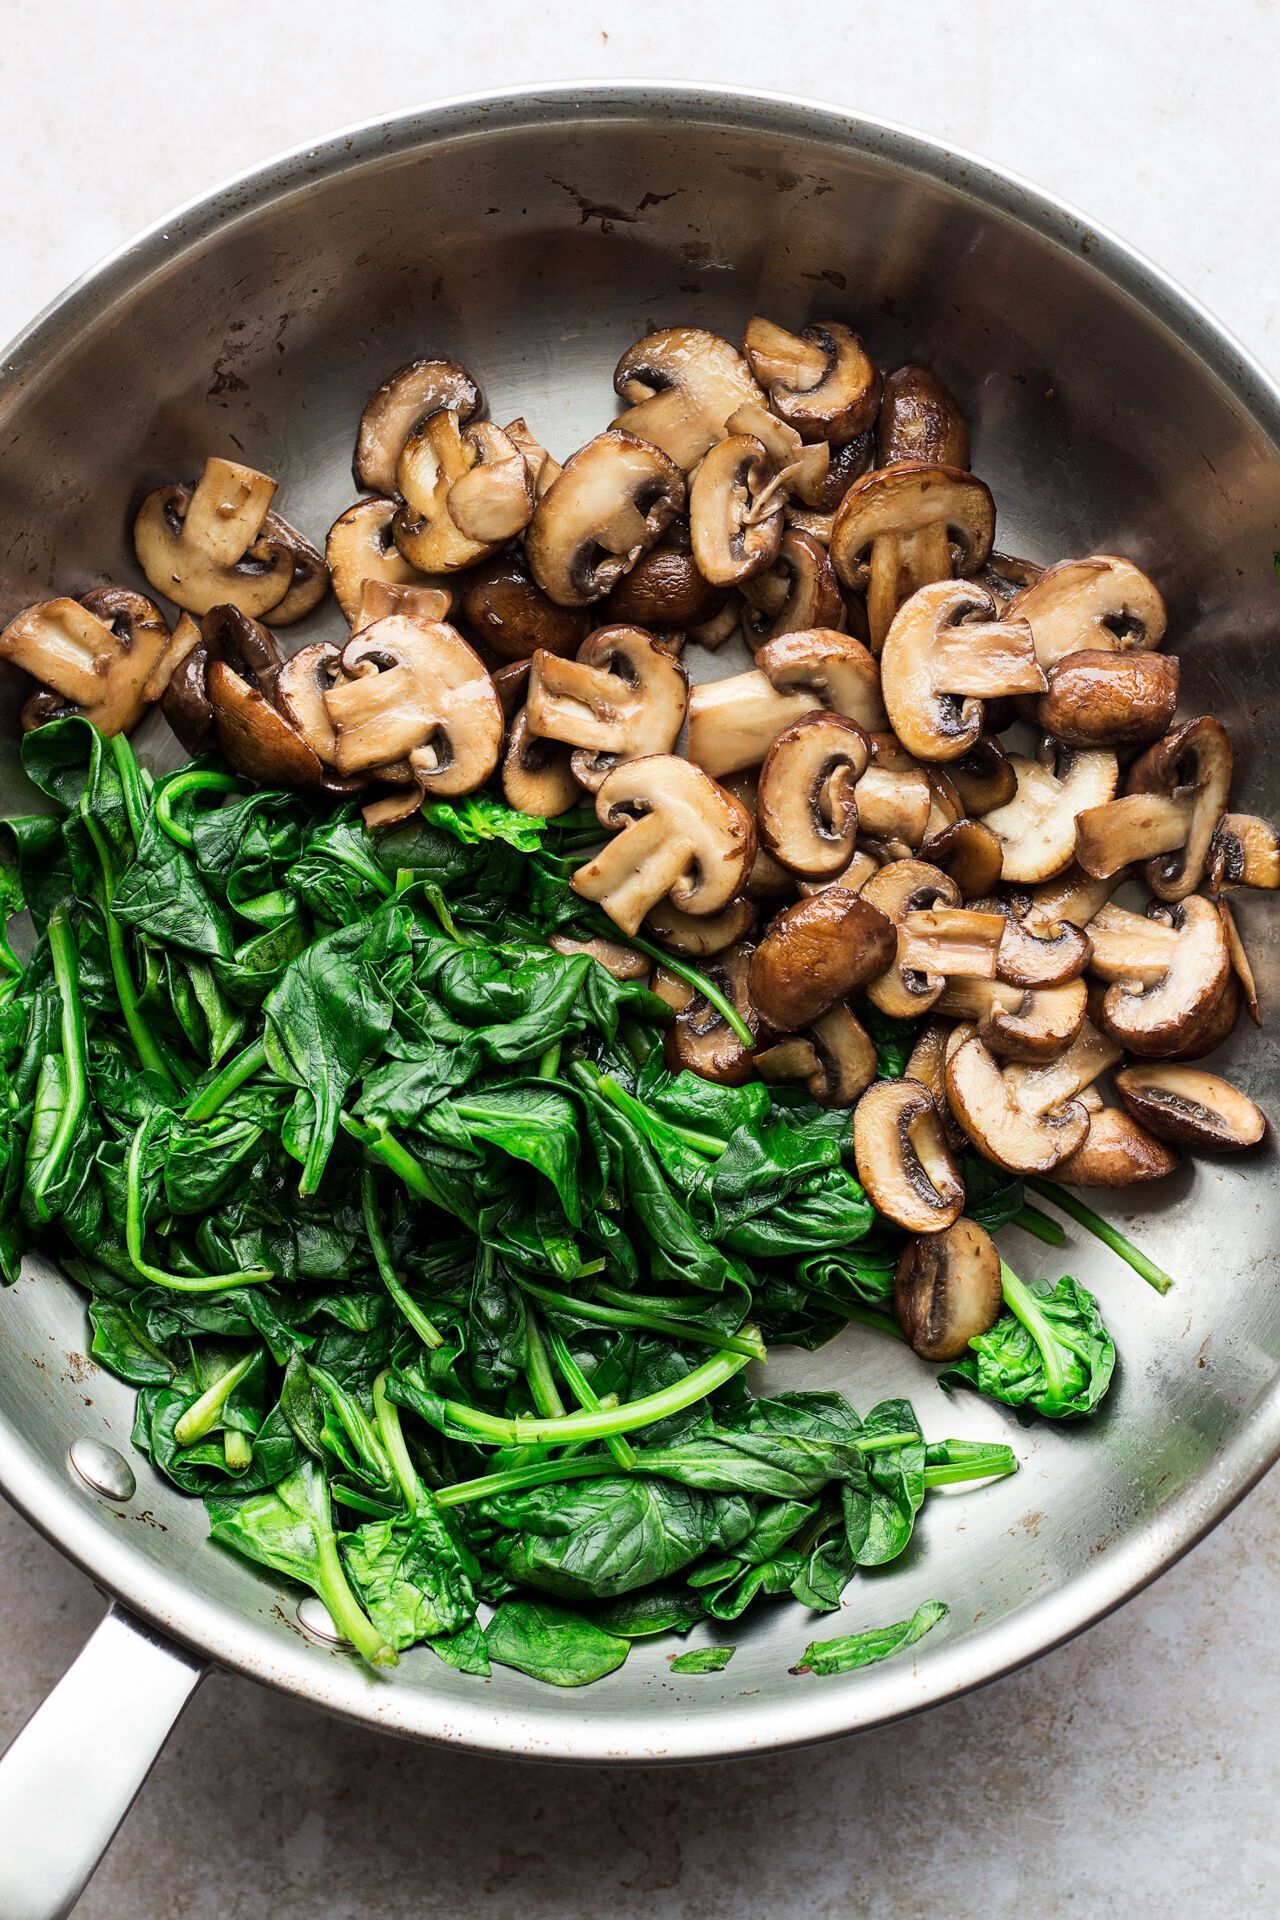 Mushrooms and spinach for the dish